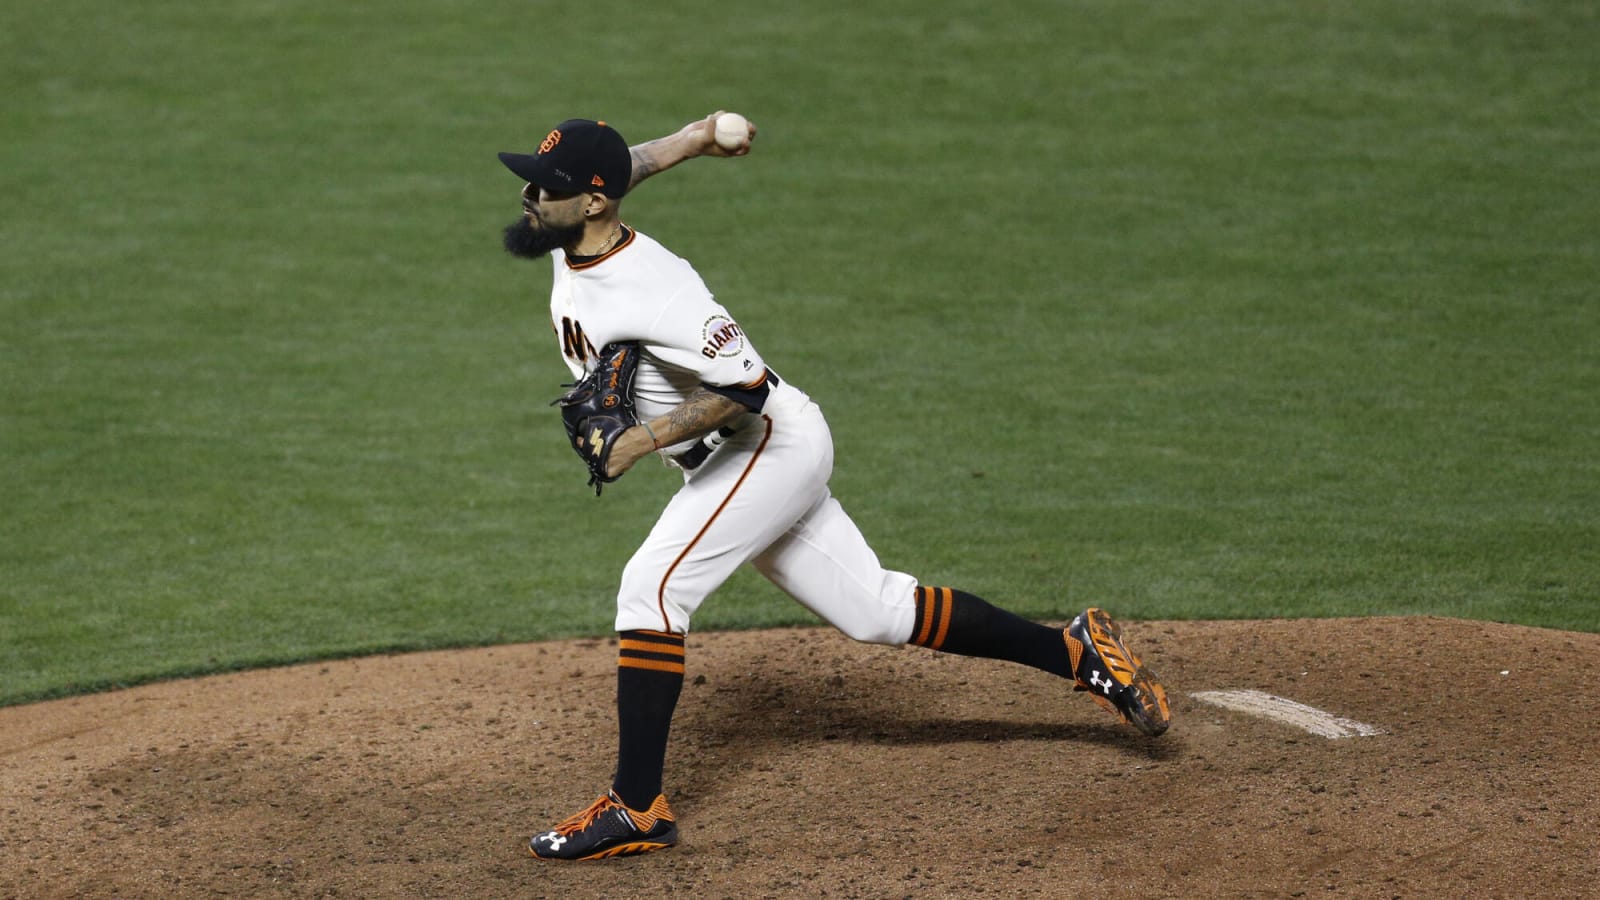 Relief pitcher Sergio Romo signs non-roster deal with Giants